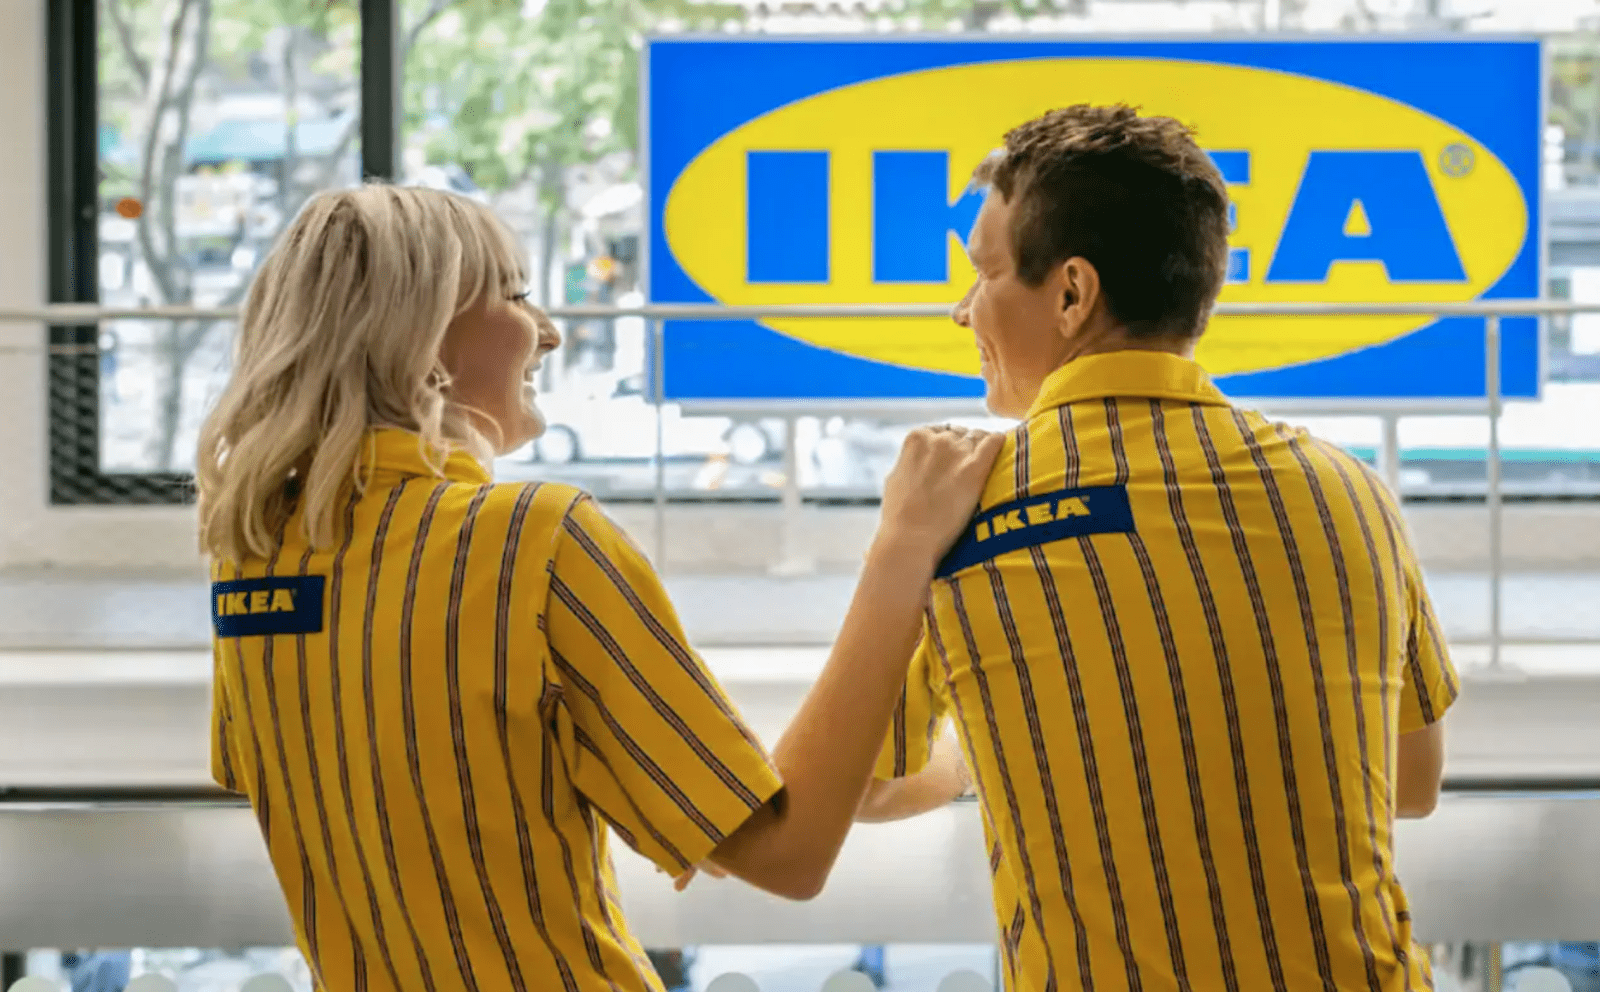 IKEA cuts sick pay for unvaccinated UK staff who have to self-isolate, The Manc